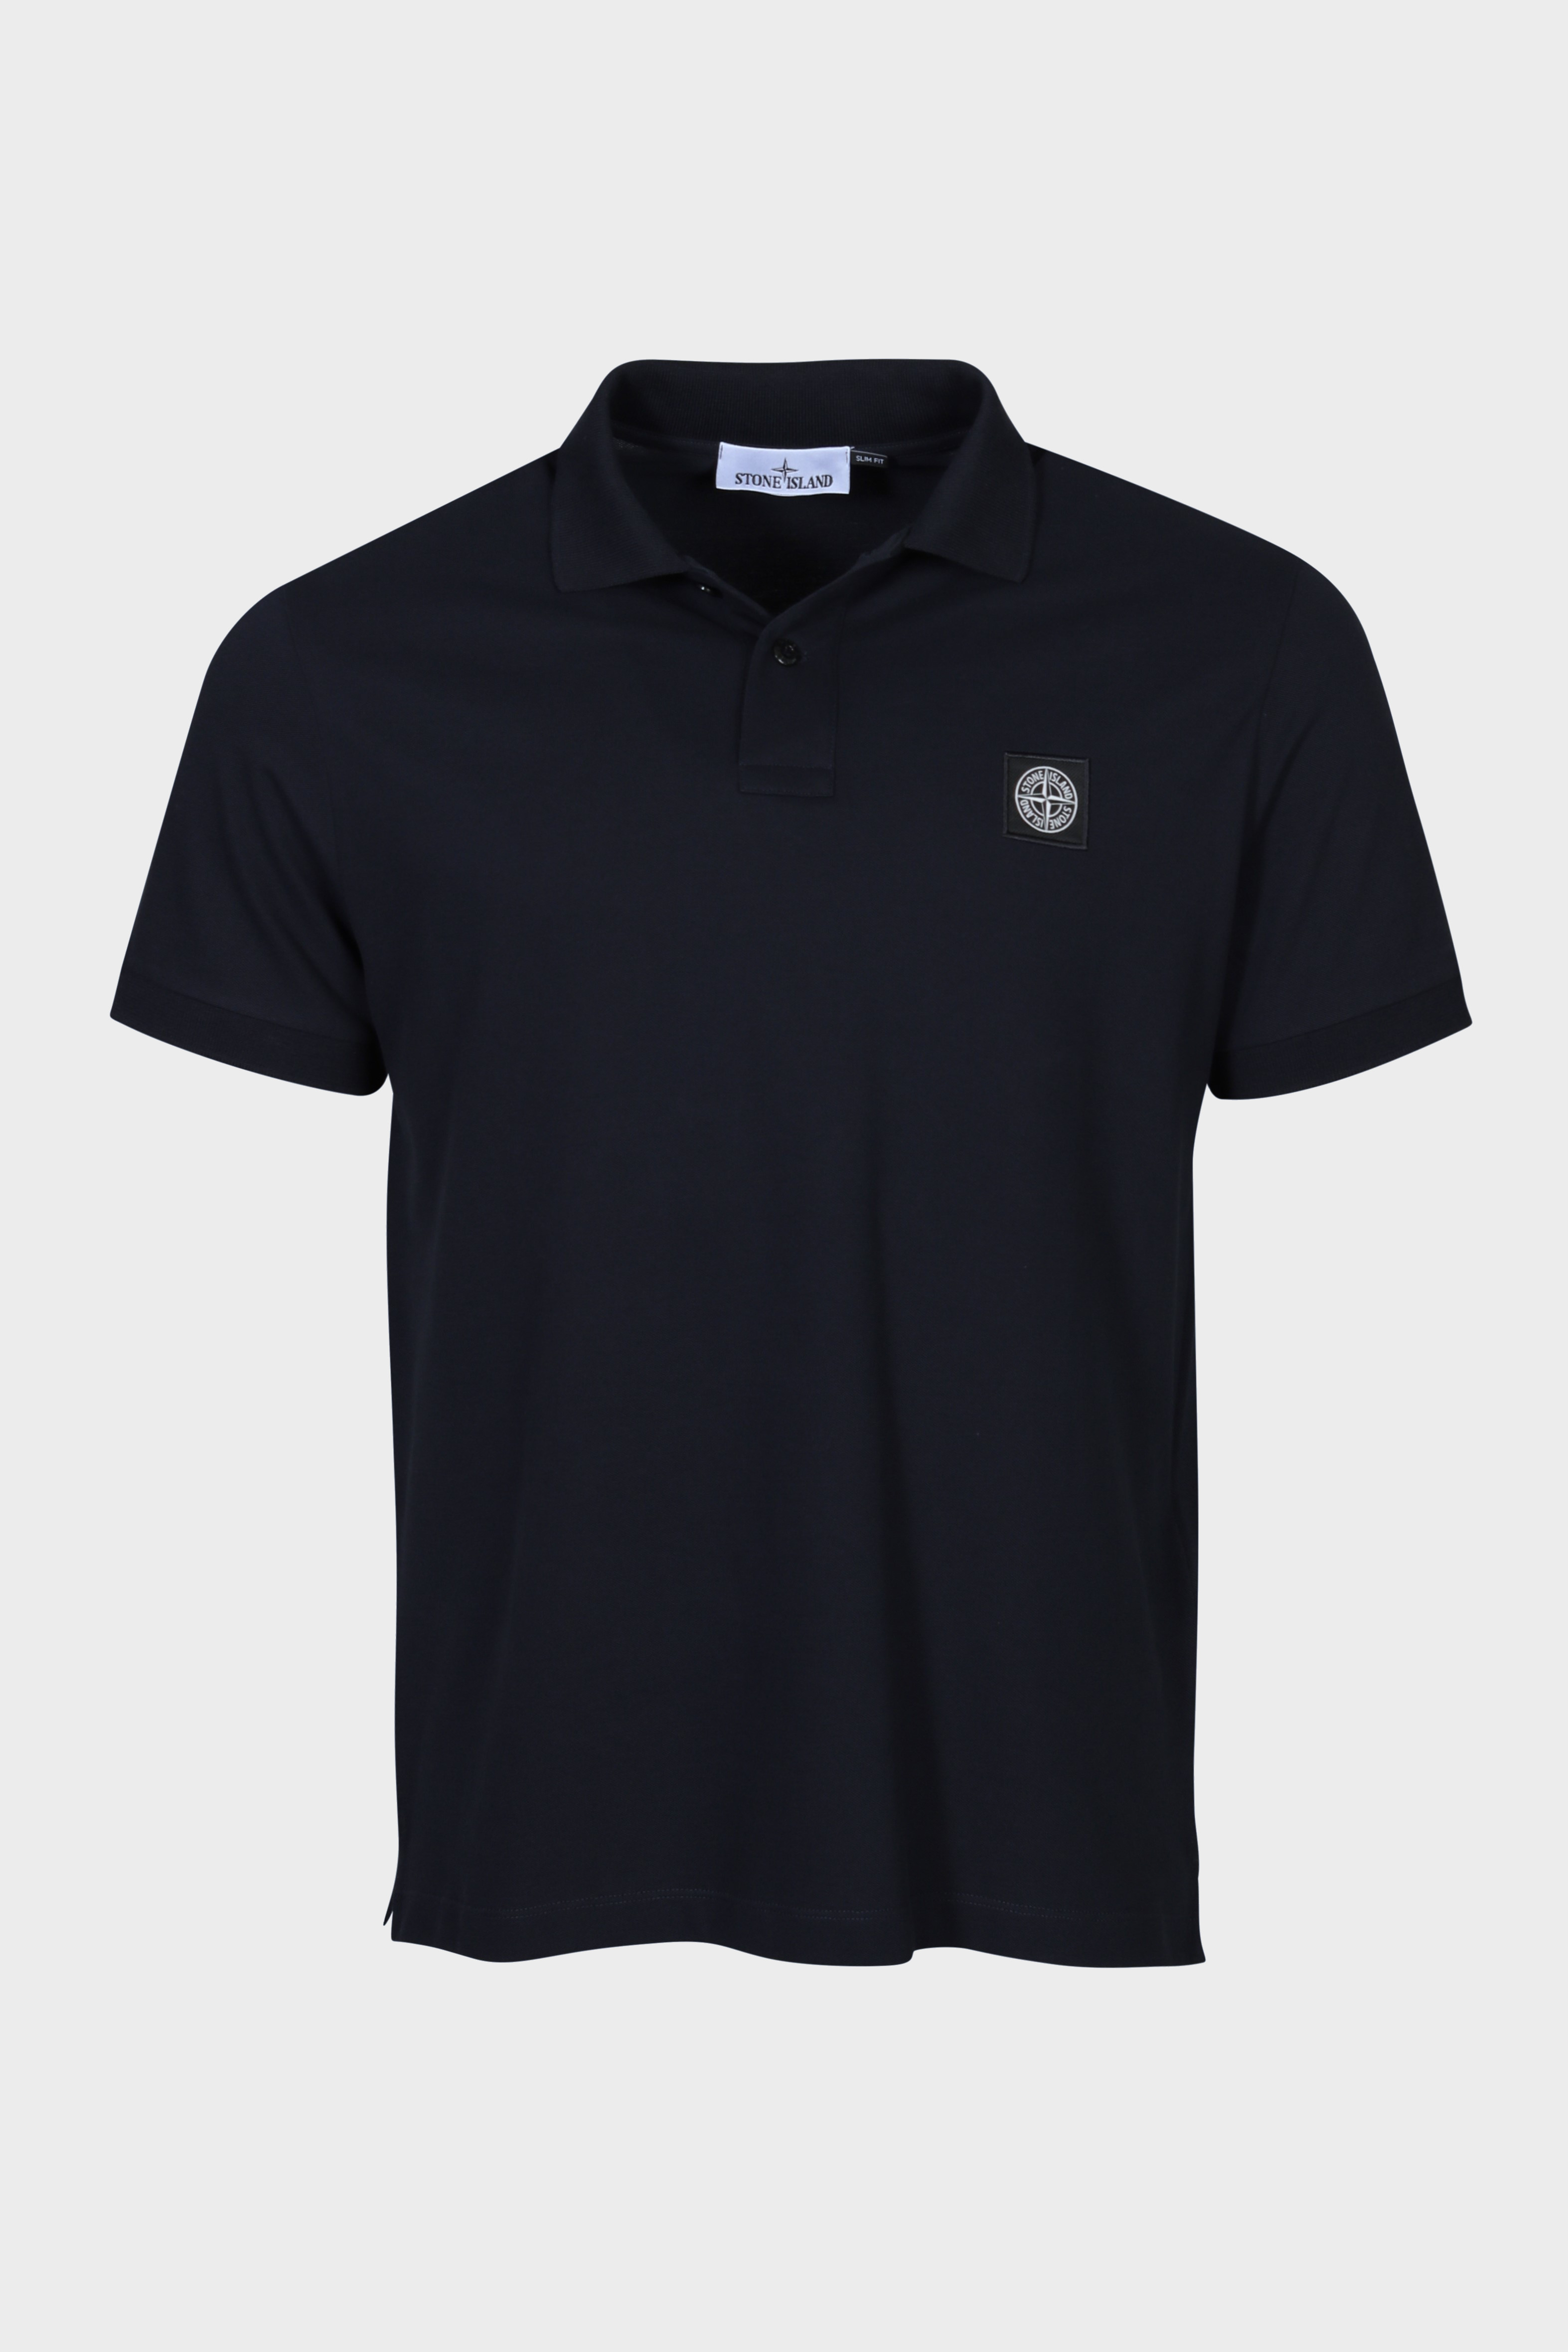 STONE ISLAND Slim Fit Polo Shirt in Navy